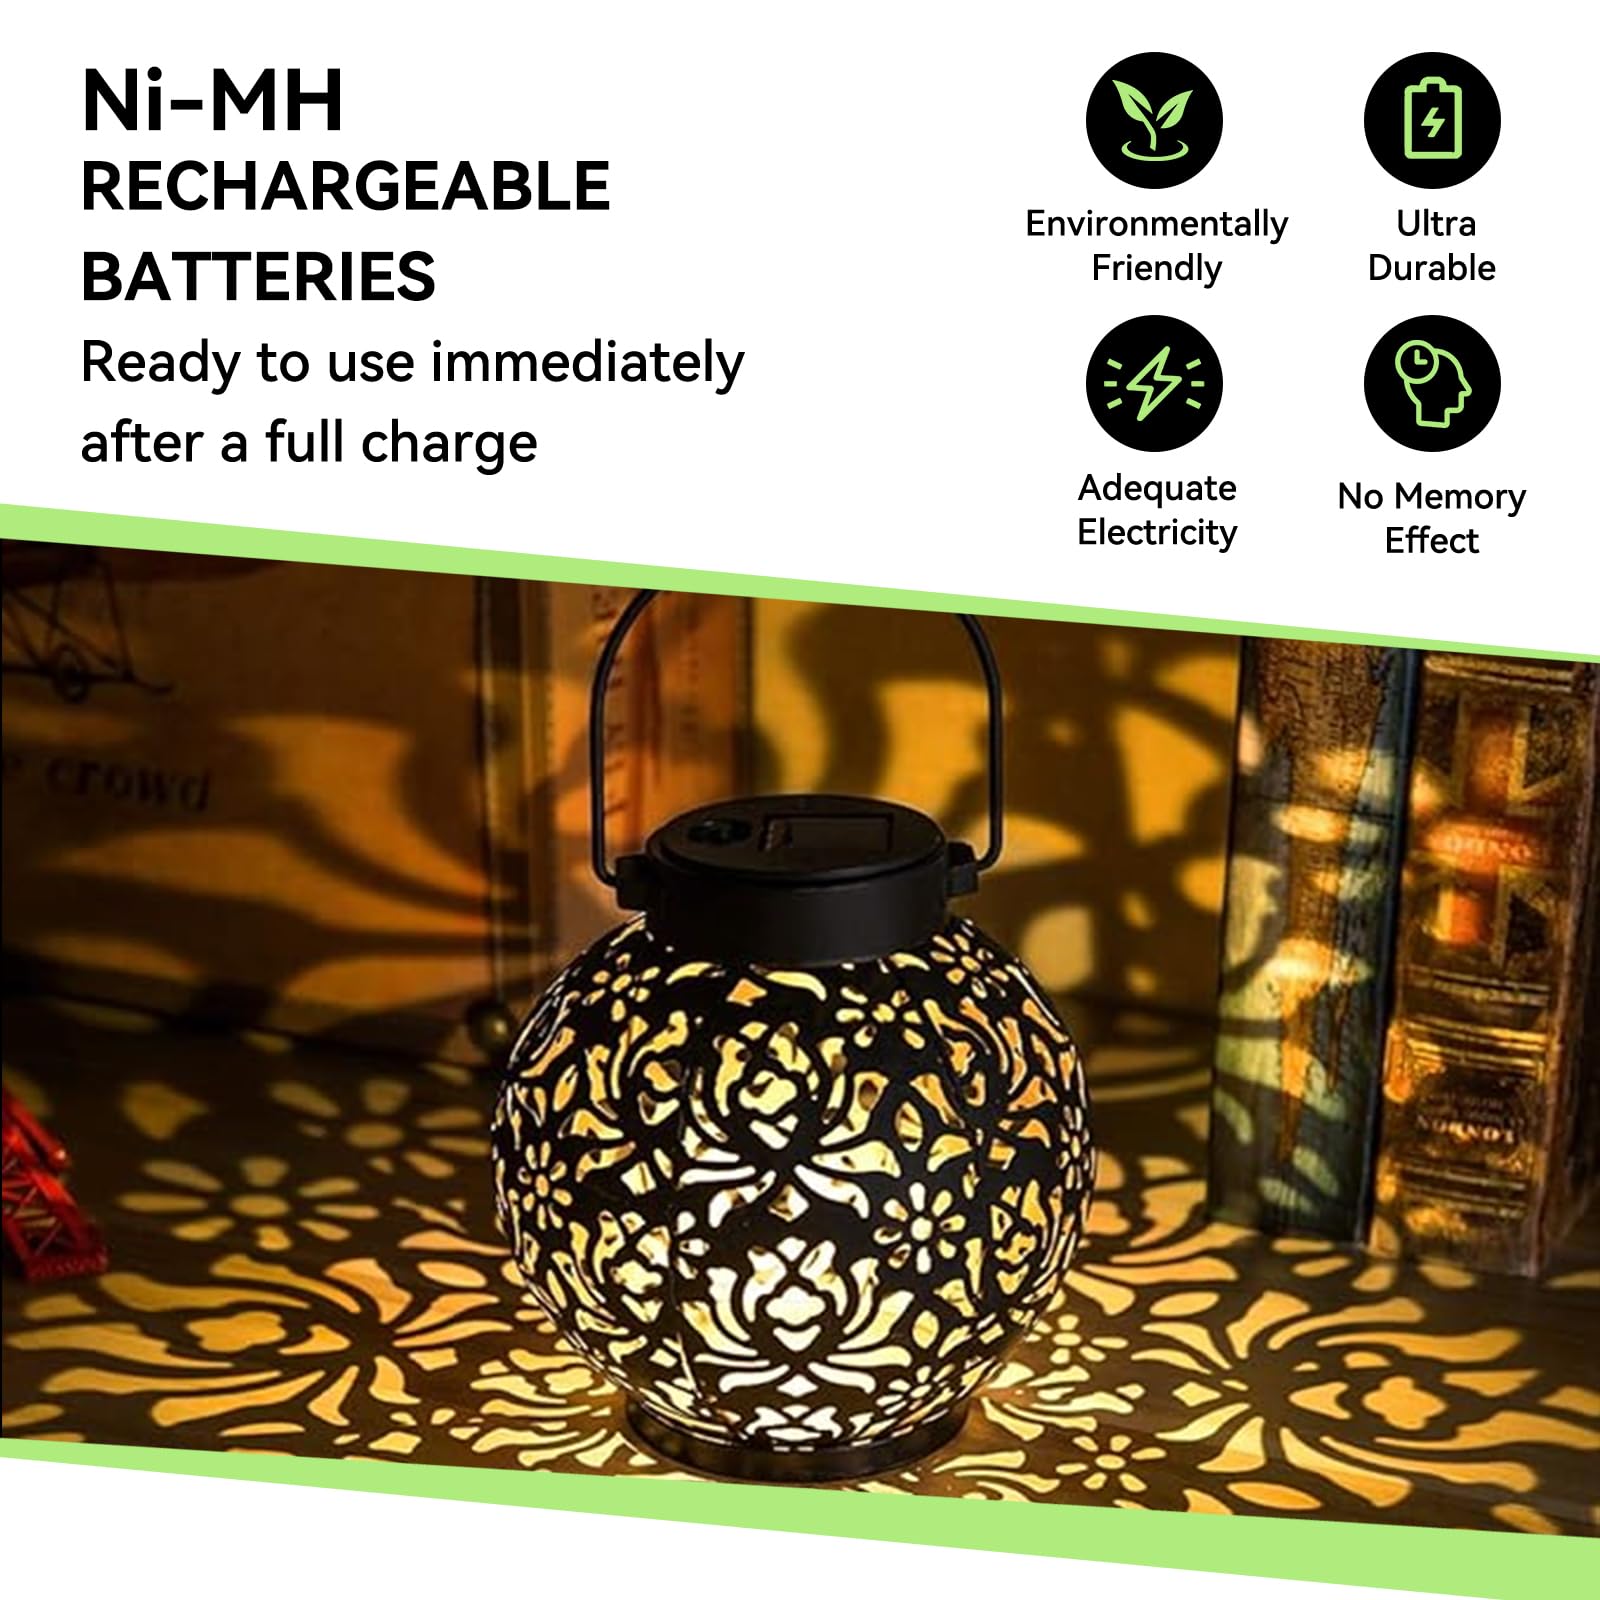 Henreepow AAA Rechargeable Battery, 1.2v AAA 600mAh Pre-Charged Ni-MH Batteries, Triple A Battery for Garden Lights, Solar Landscape lights, Solar String Lights, Pathway Lights,etc (12pack)